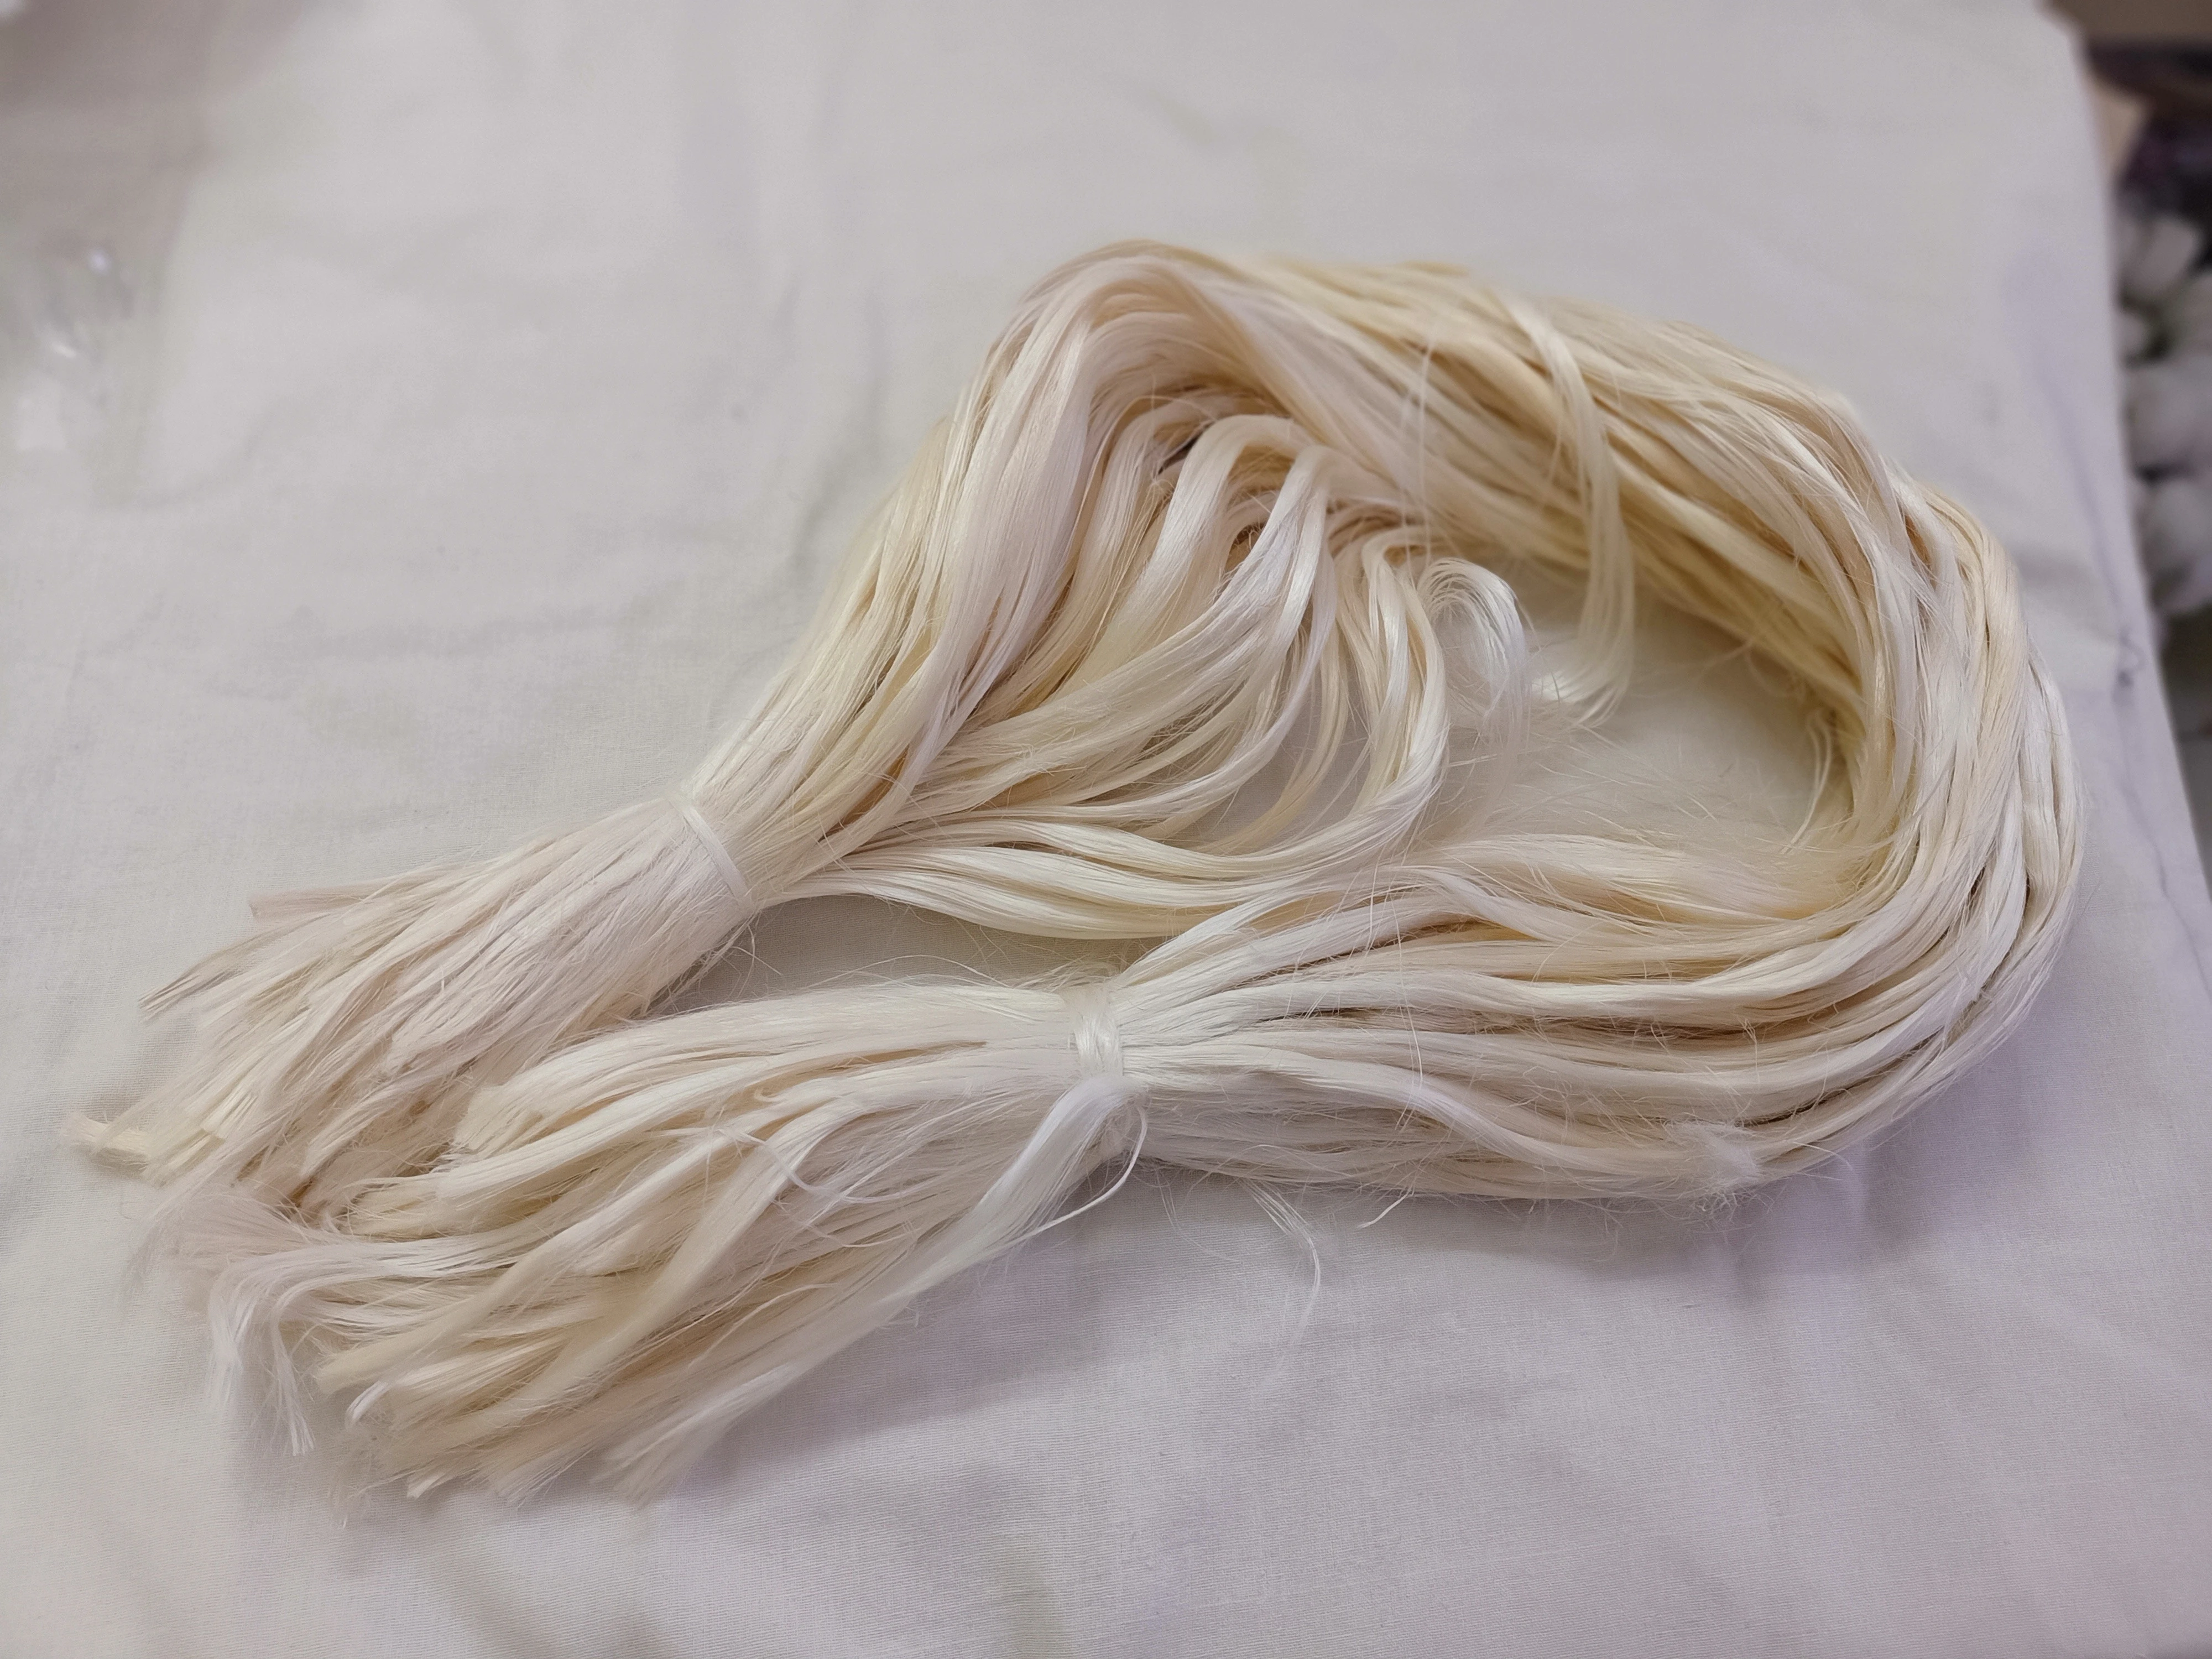 natural banana fiber for art and crafts, spinners, weavers, yarn and fiber stores